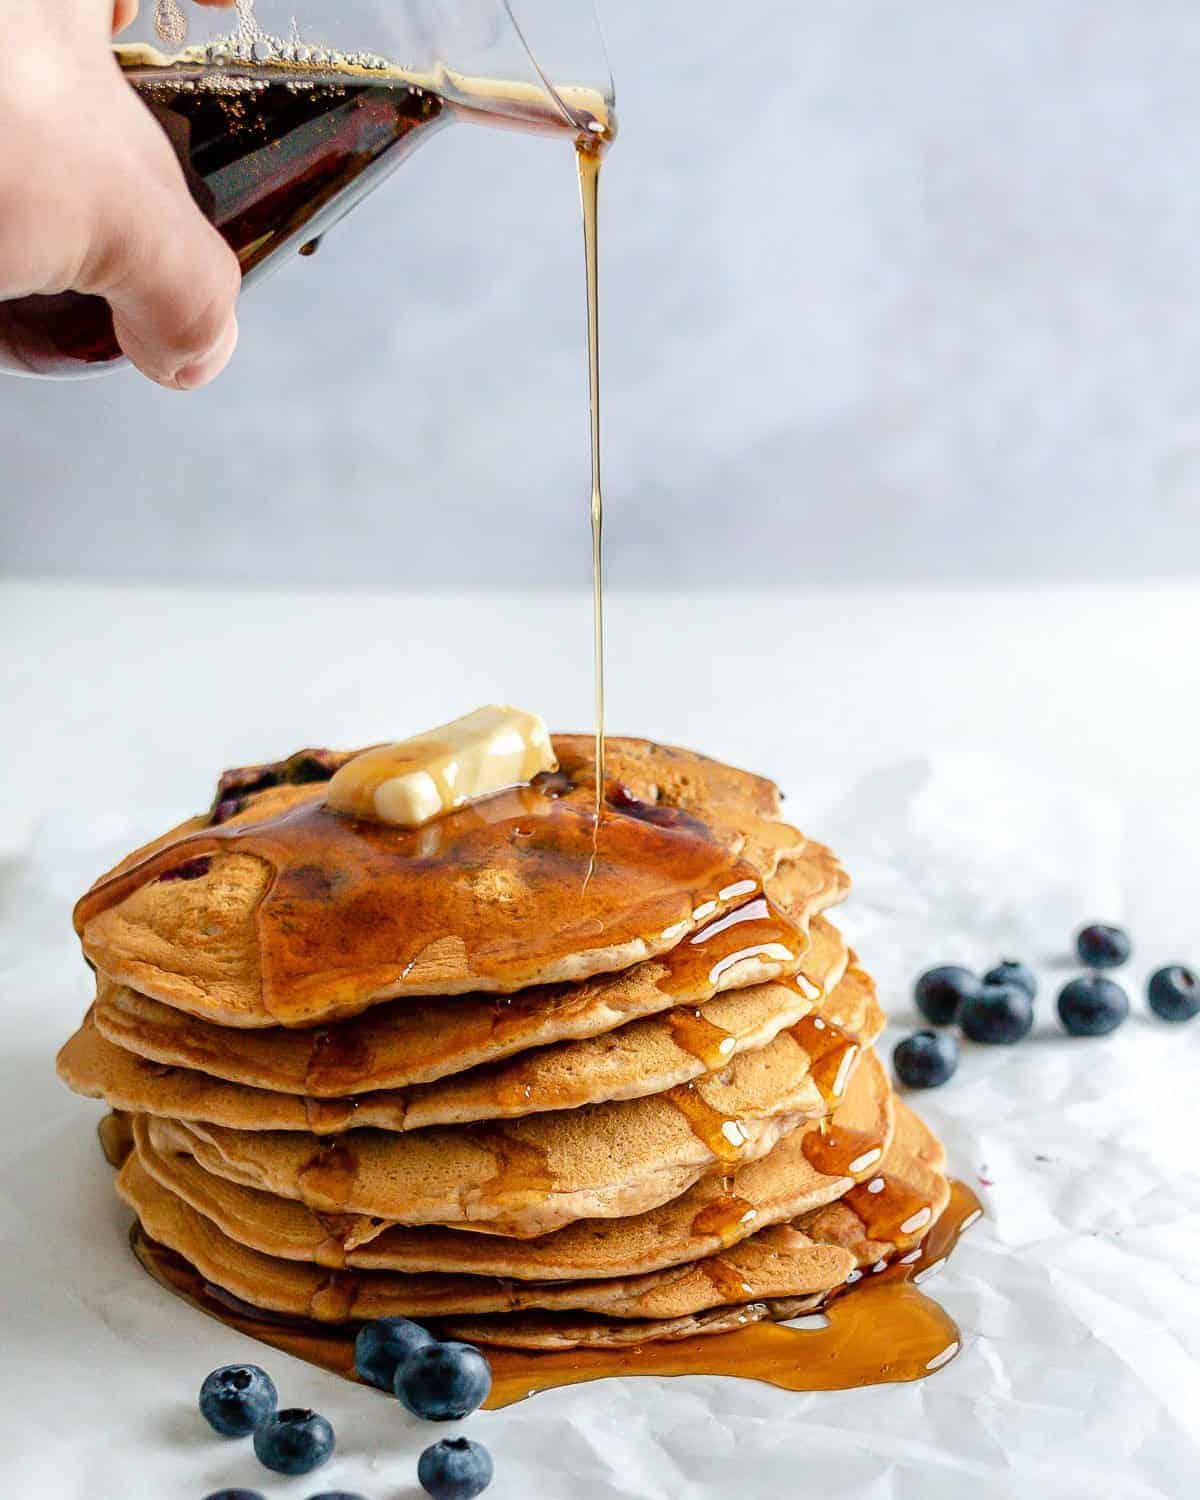 completed stack of Blueberry Pancakes with maple syrup being drizzled on the stack with blueberries scattered against a white background